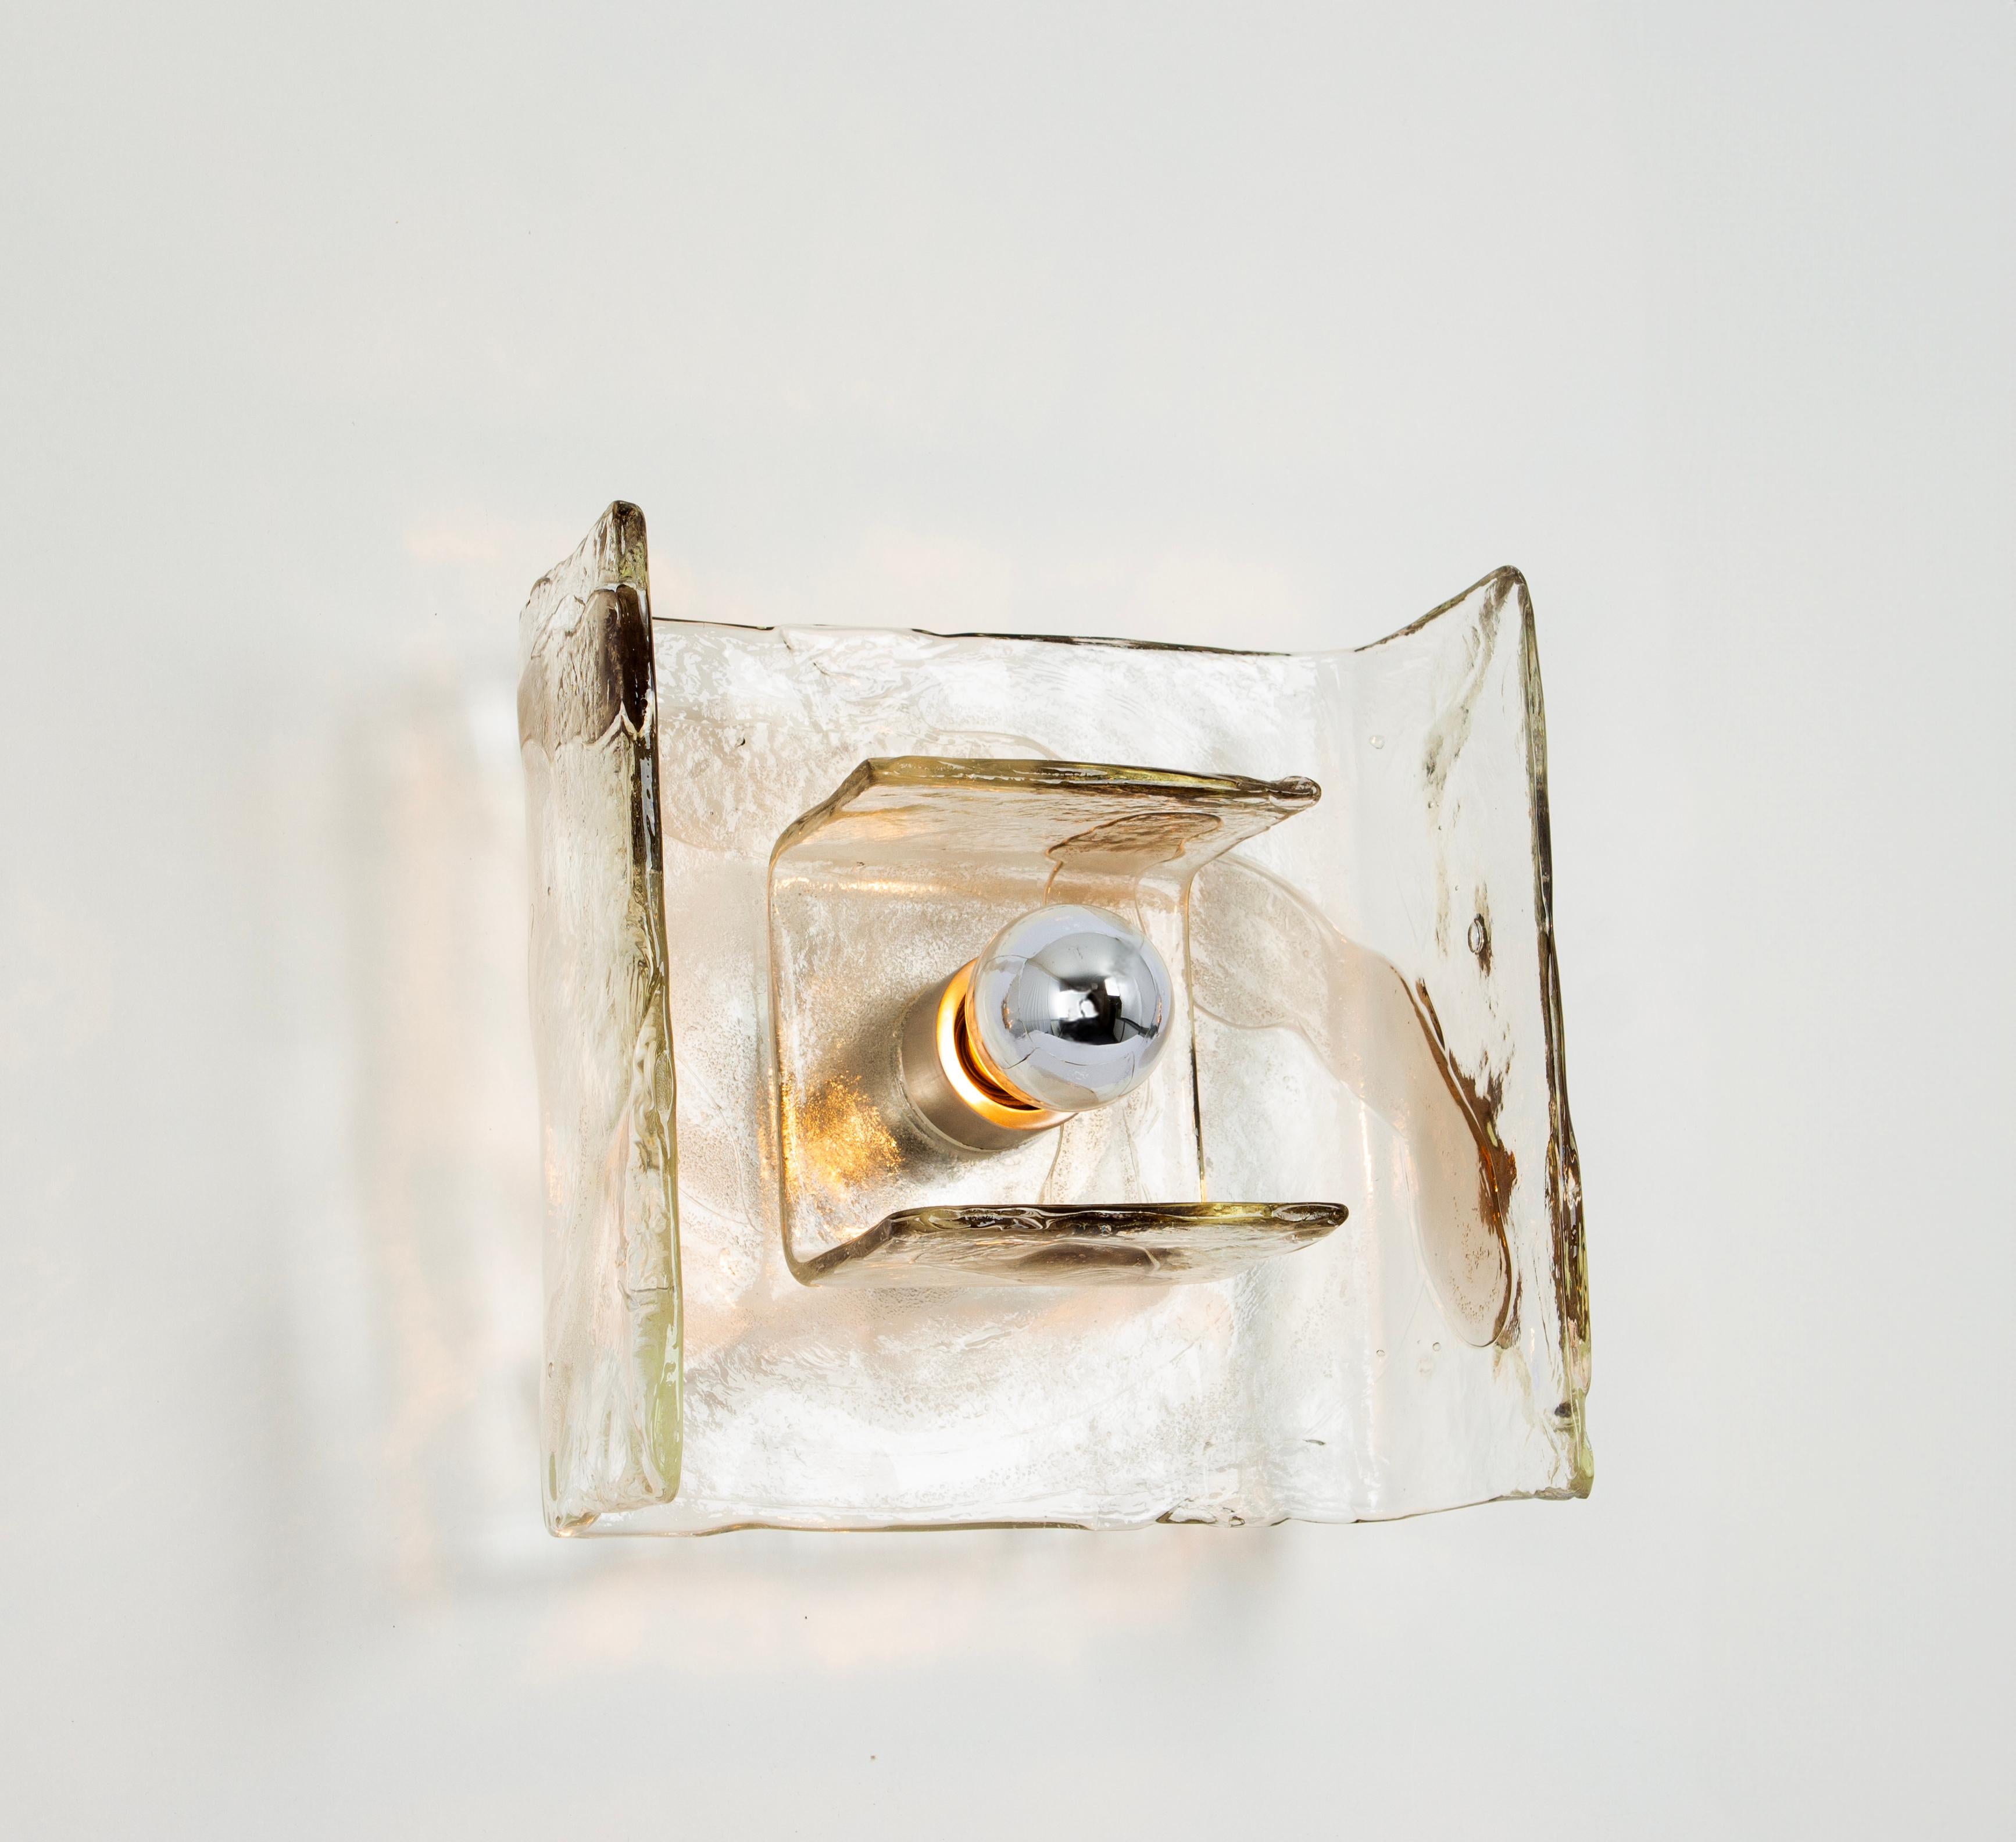 Wonderful mid-century wall sconce with a large Murano glass piece, designed by Carlo Nason for Kalmar, Austria, manufactured, circa 1960-1969.

The sconce needs 1 x E27 standard bulbs.
Light bulbs are not included. It is possible to install this